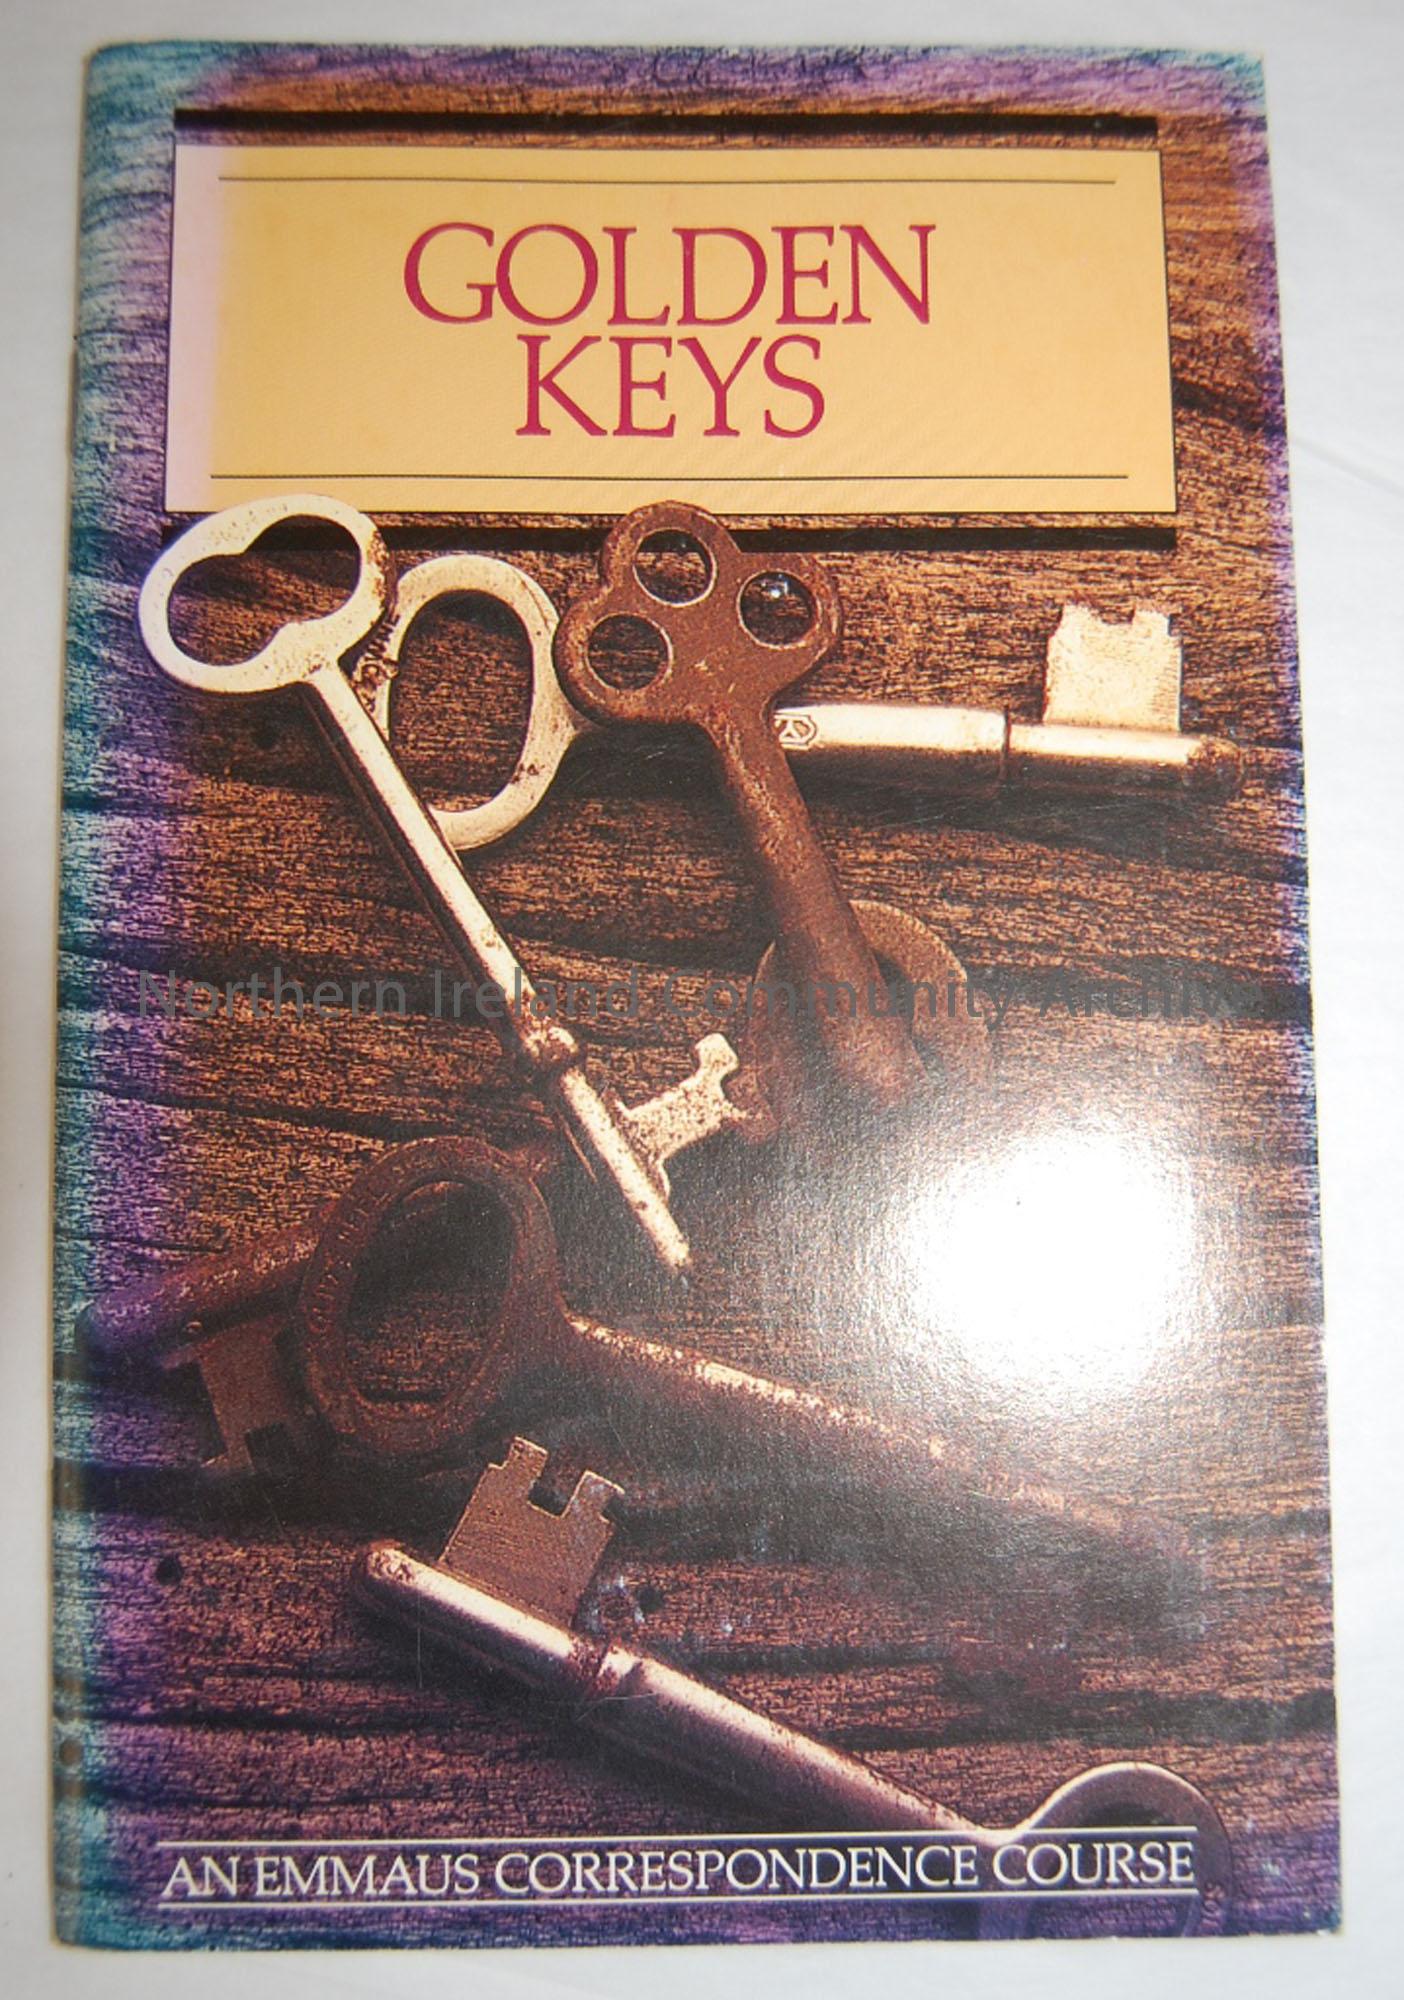 By Beverly Soderholm, Printed by Emmaus Bible College, Religious exercises. Cover shows photograph of keys.